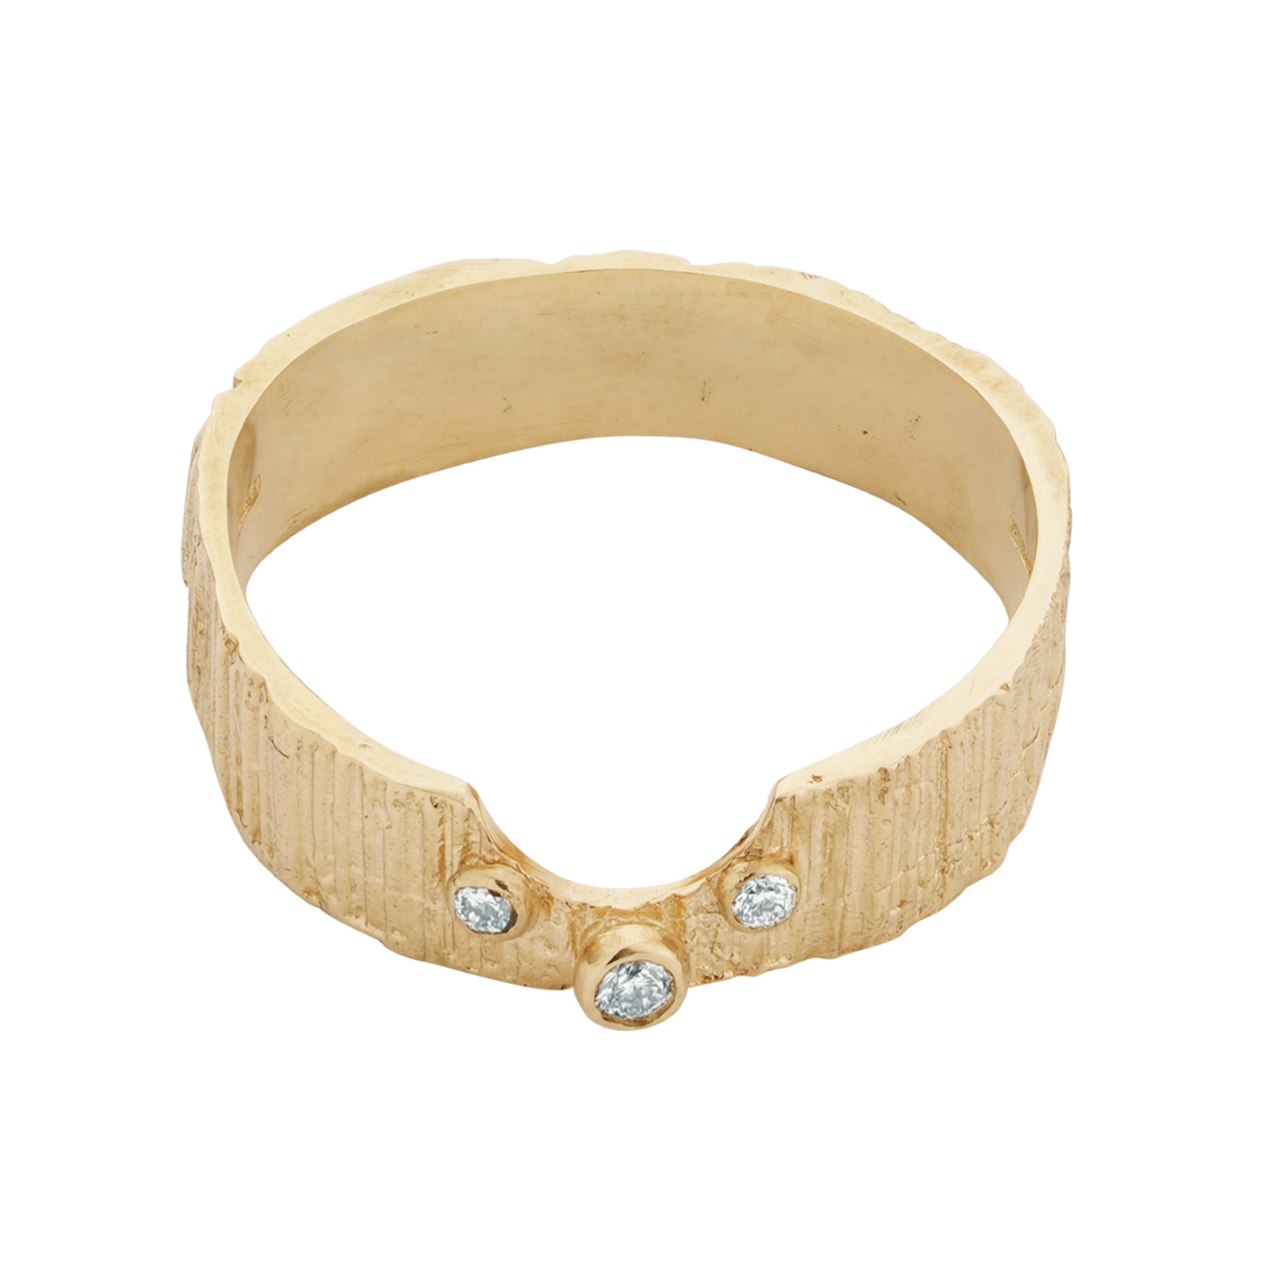 6mm U Shaped Band with Diamonds, Eily O Connell, tomfoolery